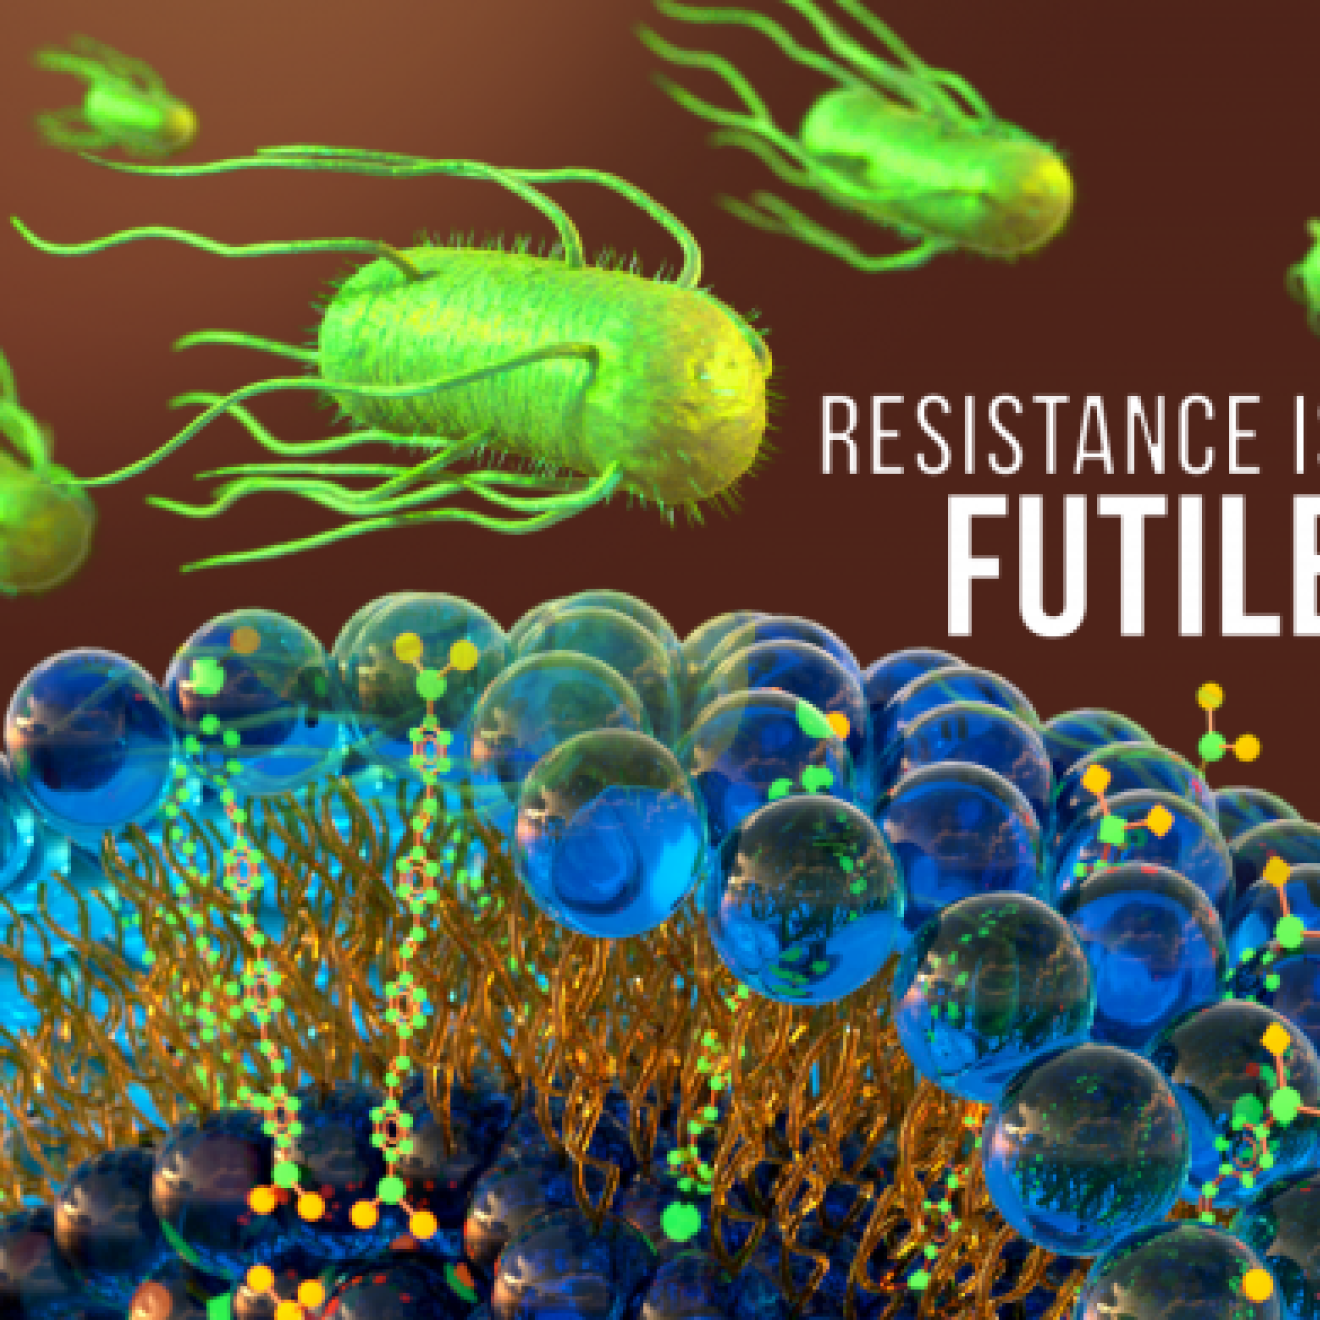 Visualization of bacteria harassed by an antibiotic with the words Resistance is Futile on the right side of the image